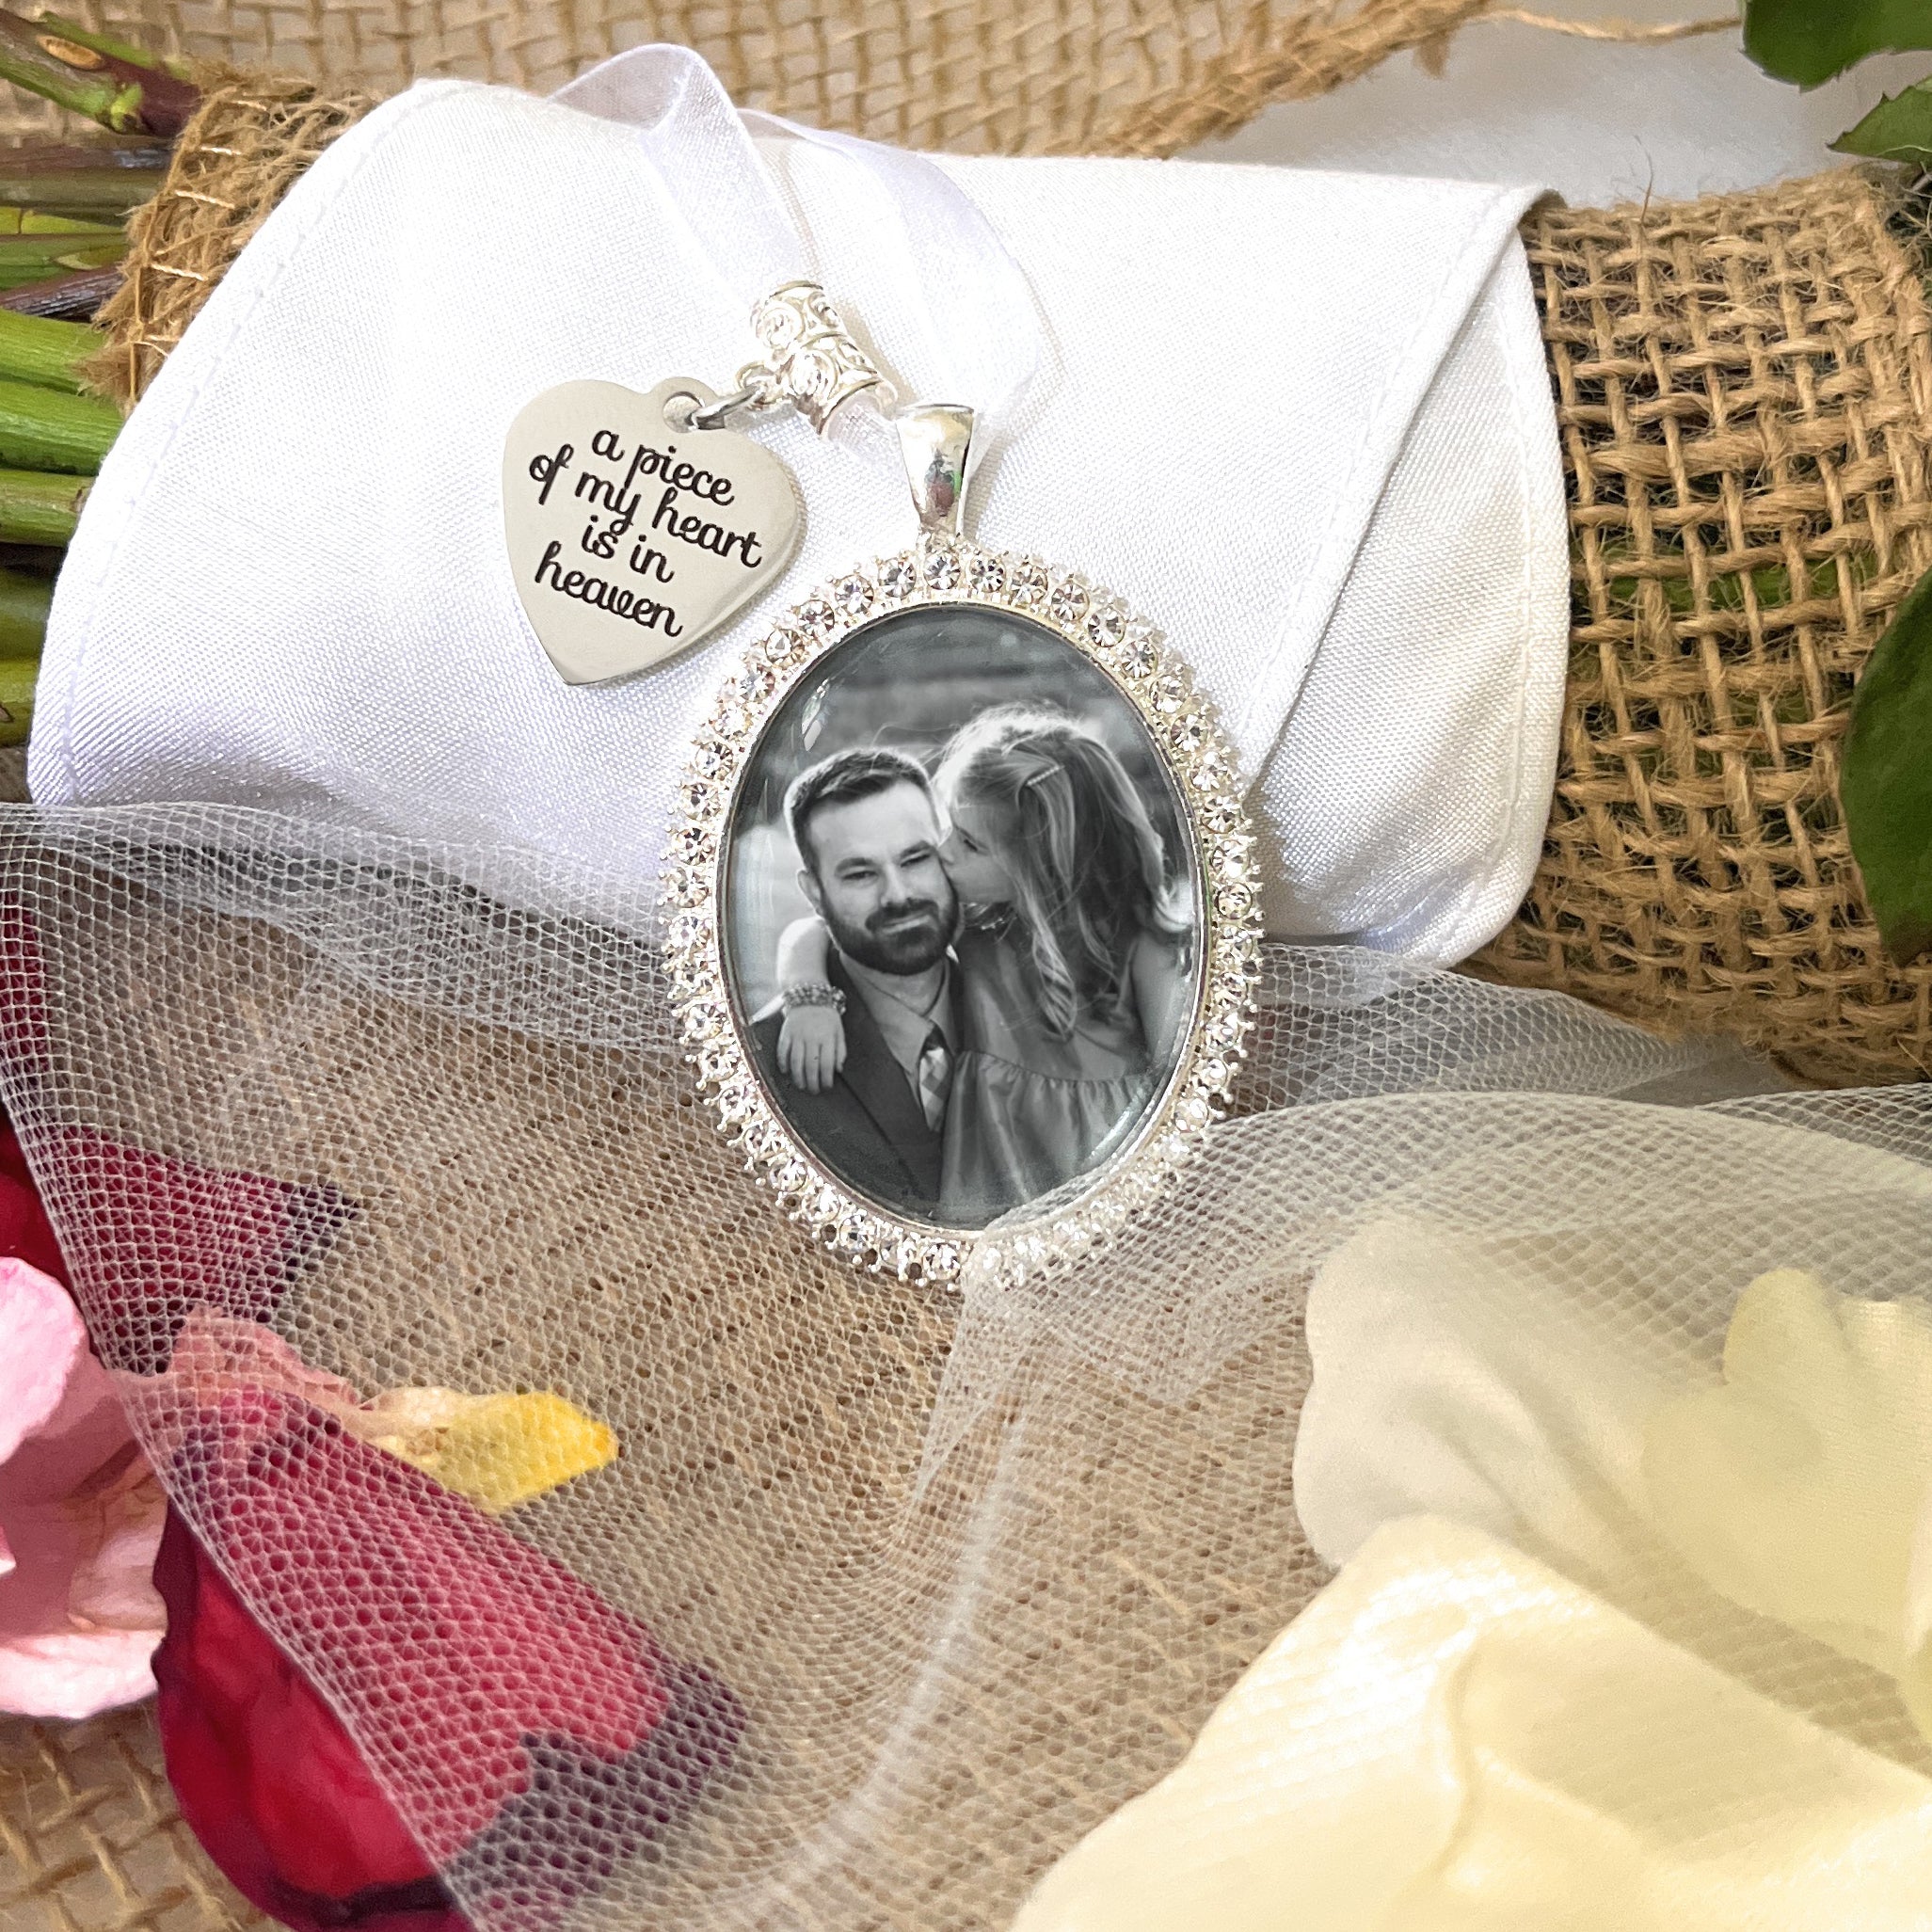 Bridal Memorial Photo Bouquet Charm in oval shape with clear rhinestones around edge of pendant. Image size is roughly 30mmx40mm. Comes with heart shape charm that reads, a piece of my heart is in heaven. Pendant and charm come on a white ribbon to attach to bridal bouquet.